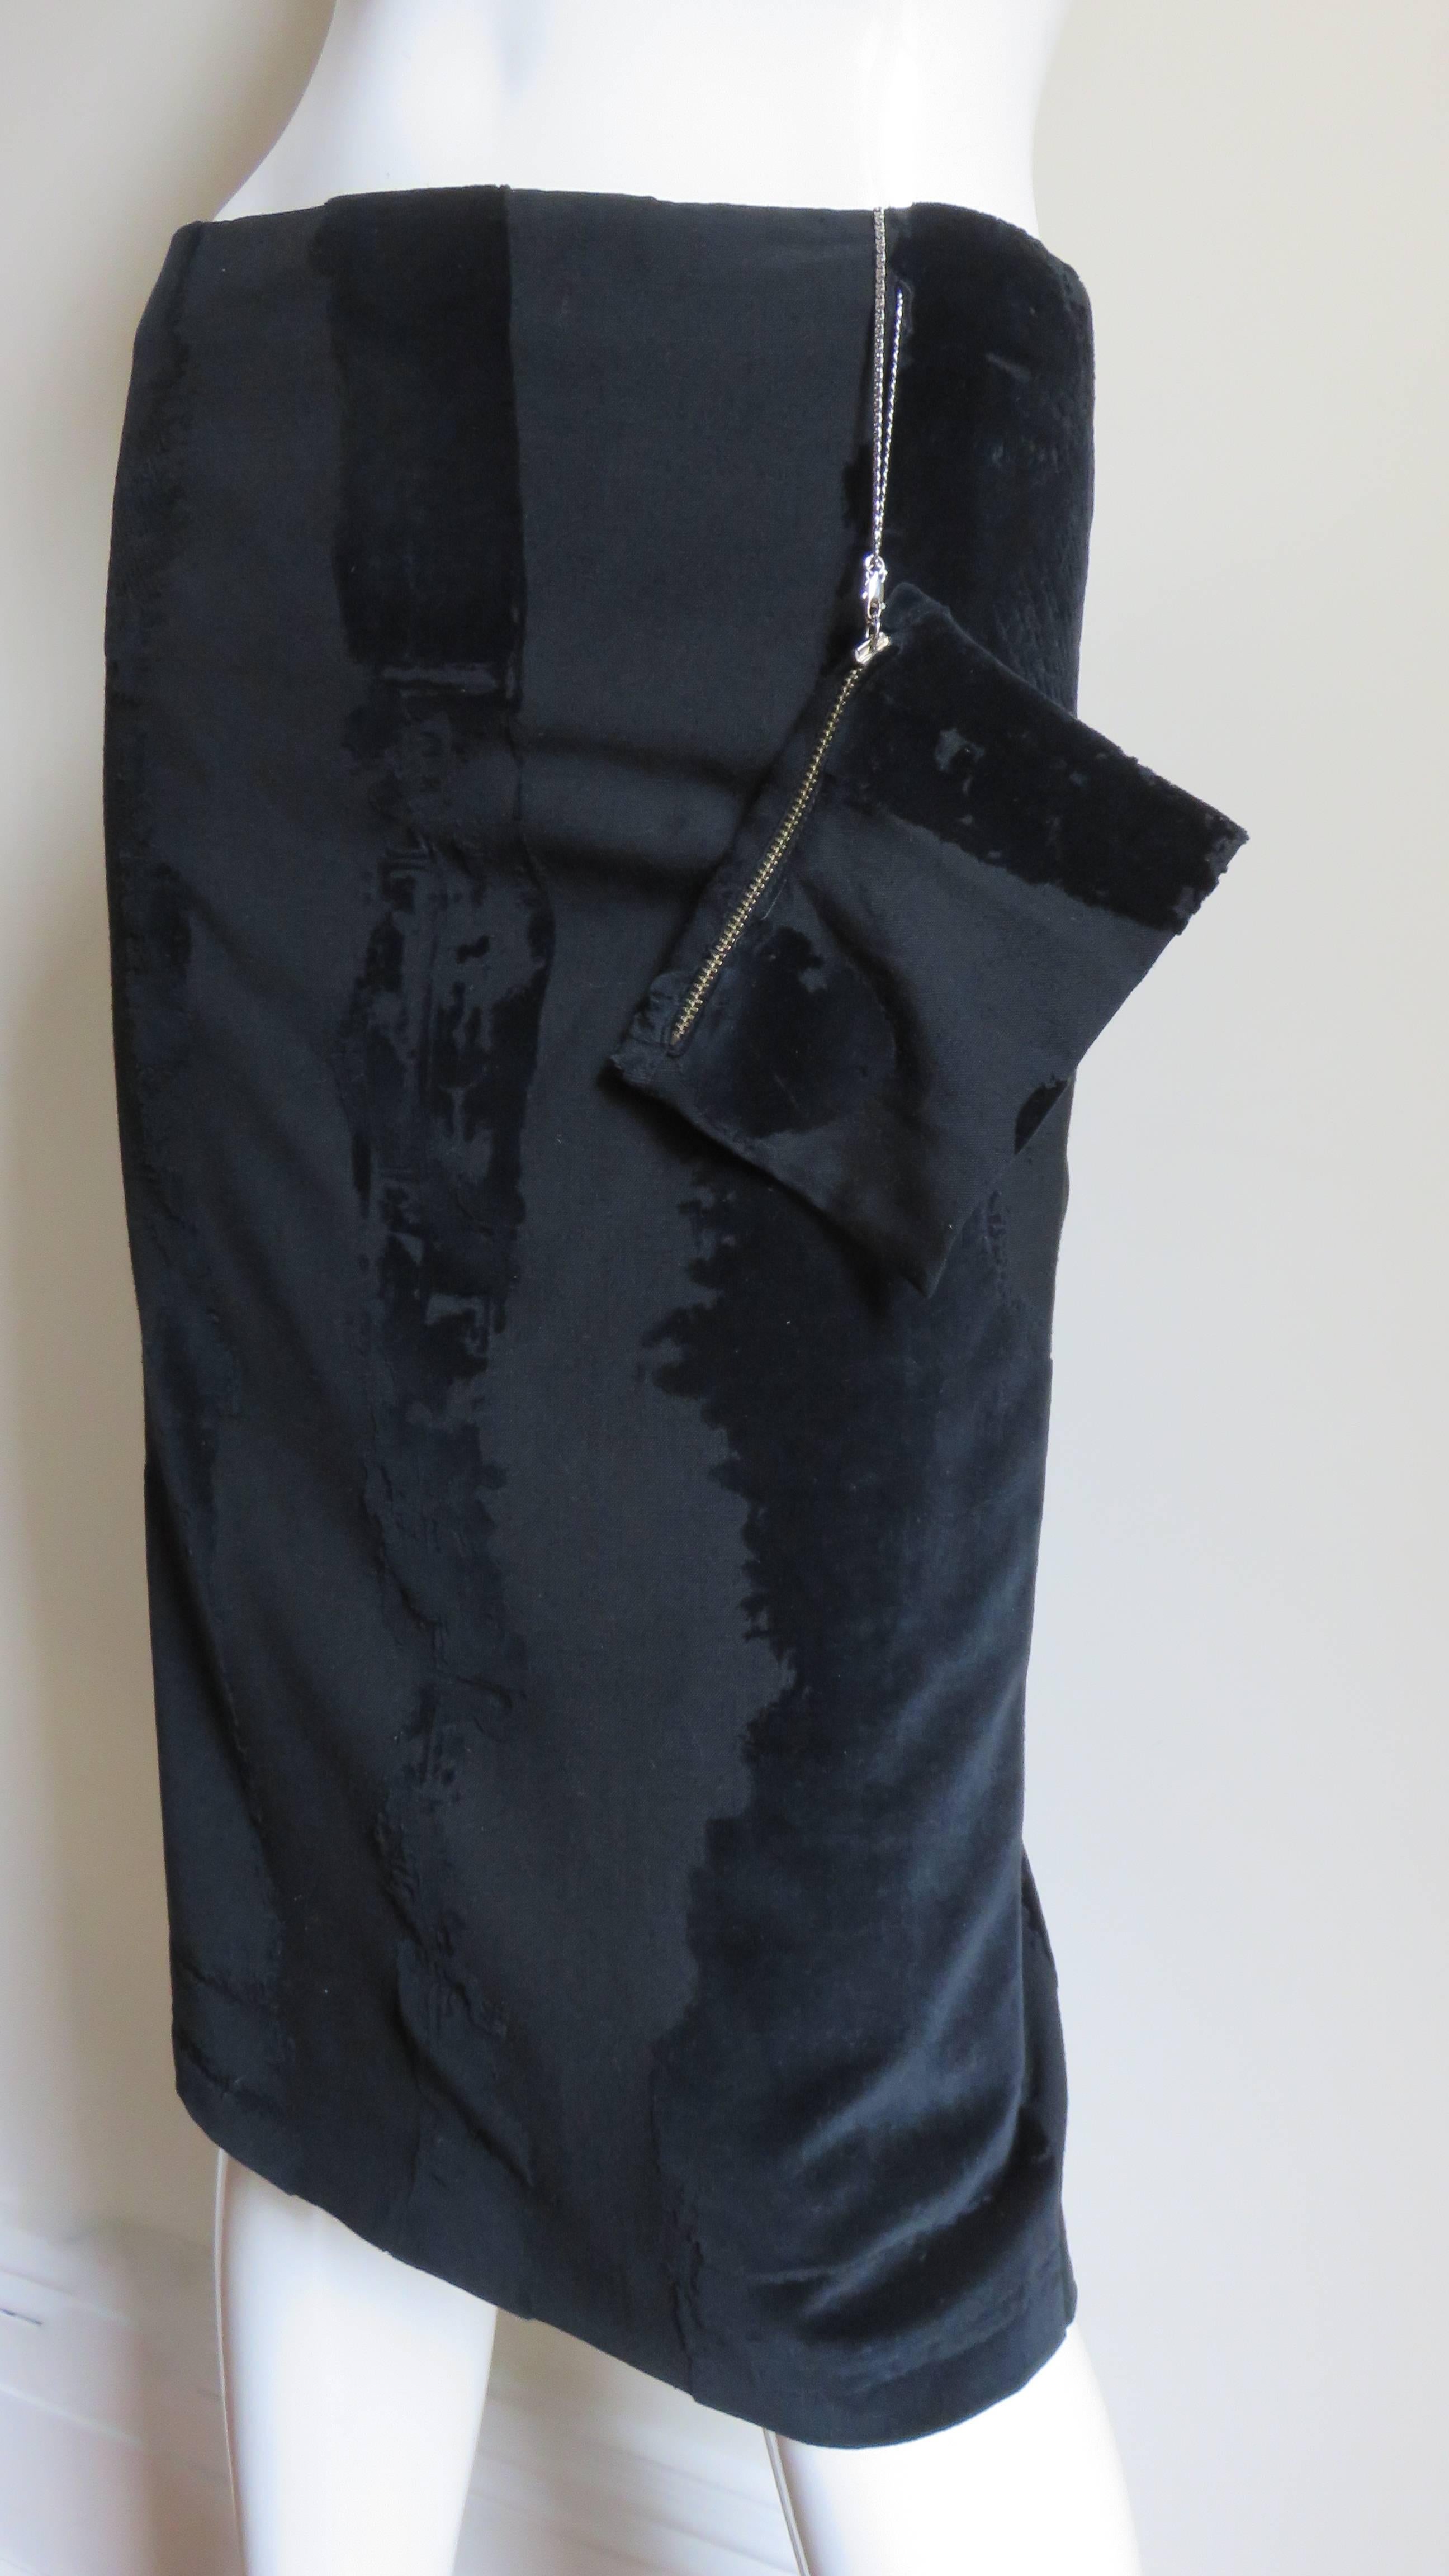 A fabulous black burn out velvet skirt by Jean Paul Gaultier.   It is pencil style with wide abstract vertical velvet stripes and a small zipper pouch attached by a chain at the waist.  It is fully lined, has a center back zipper and a back kick